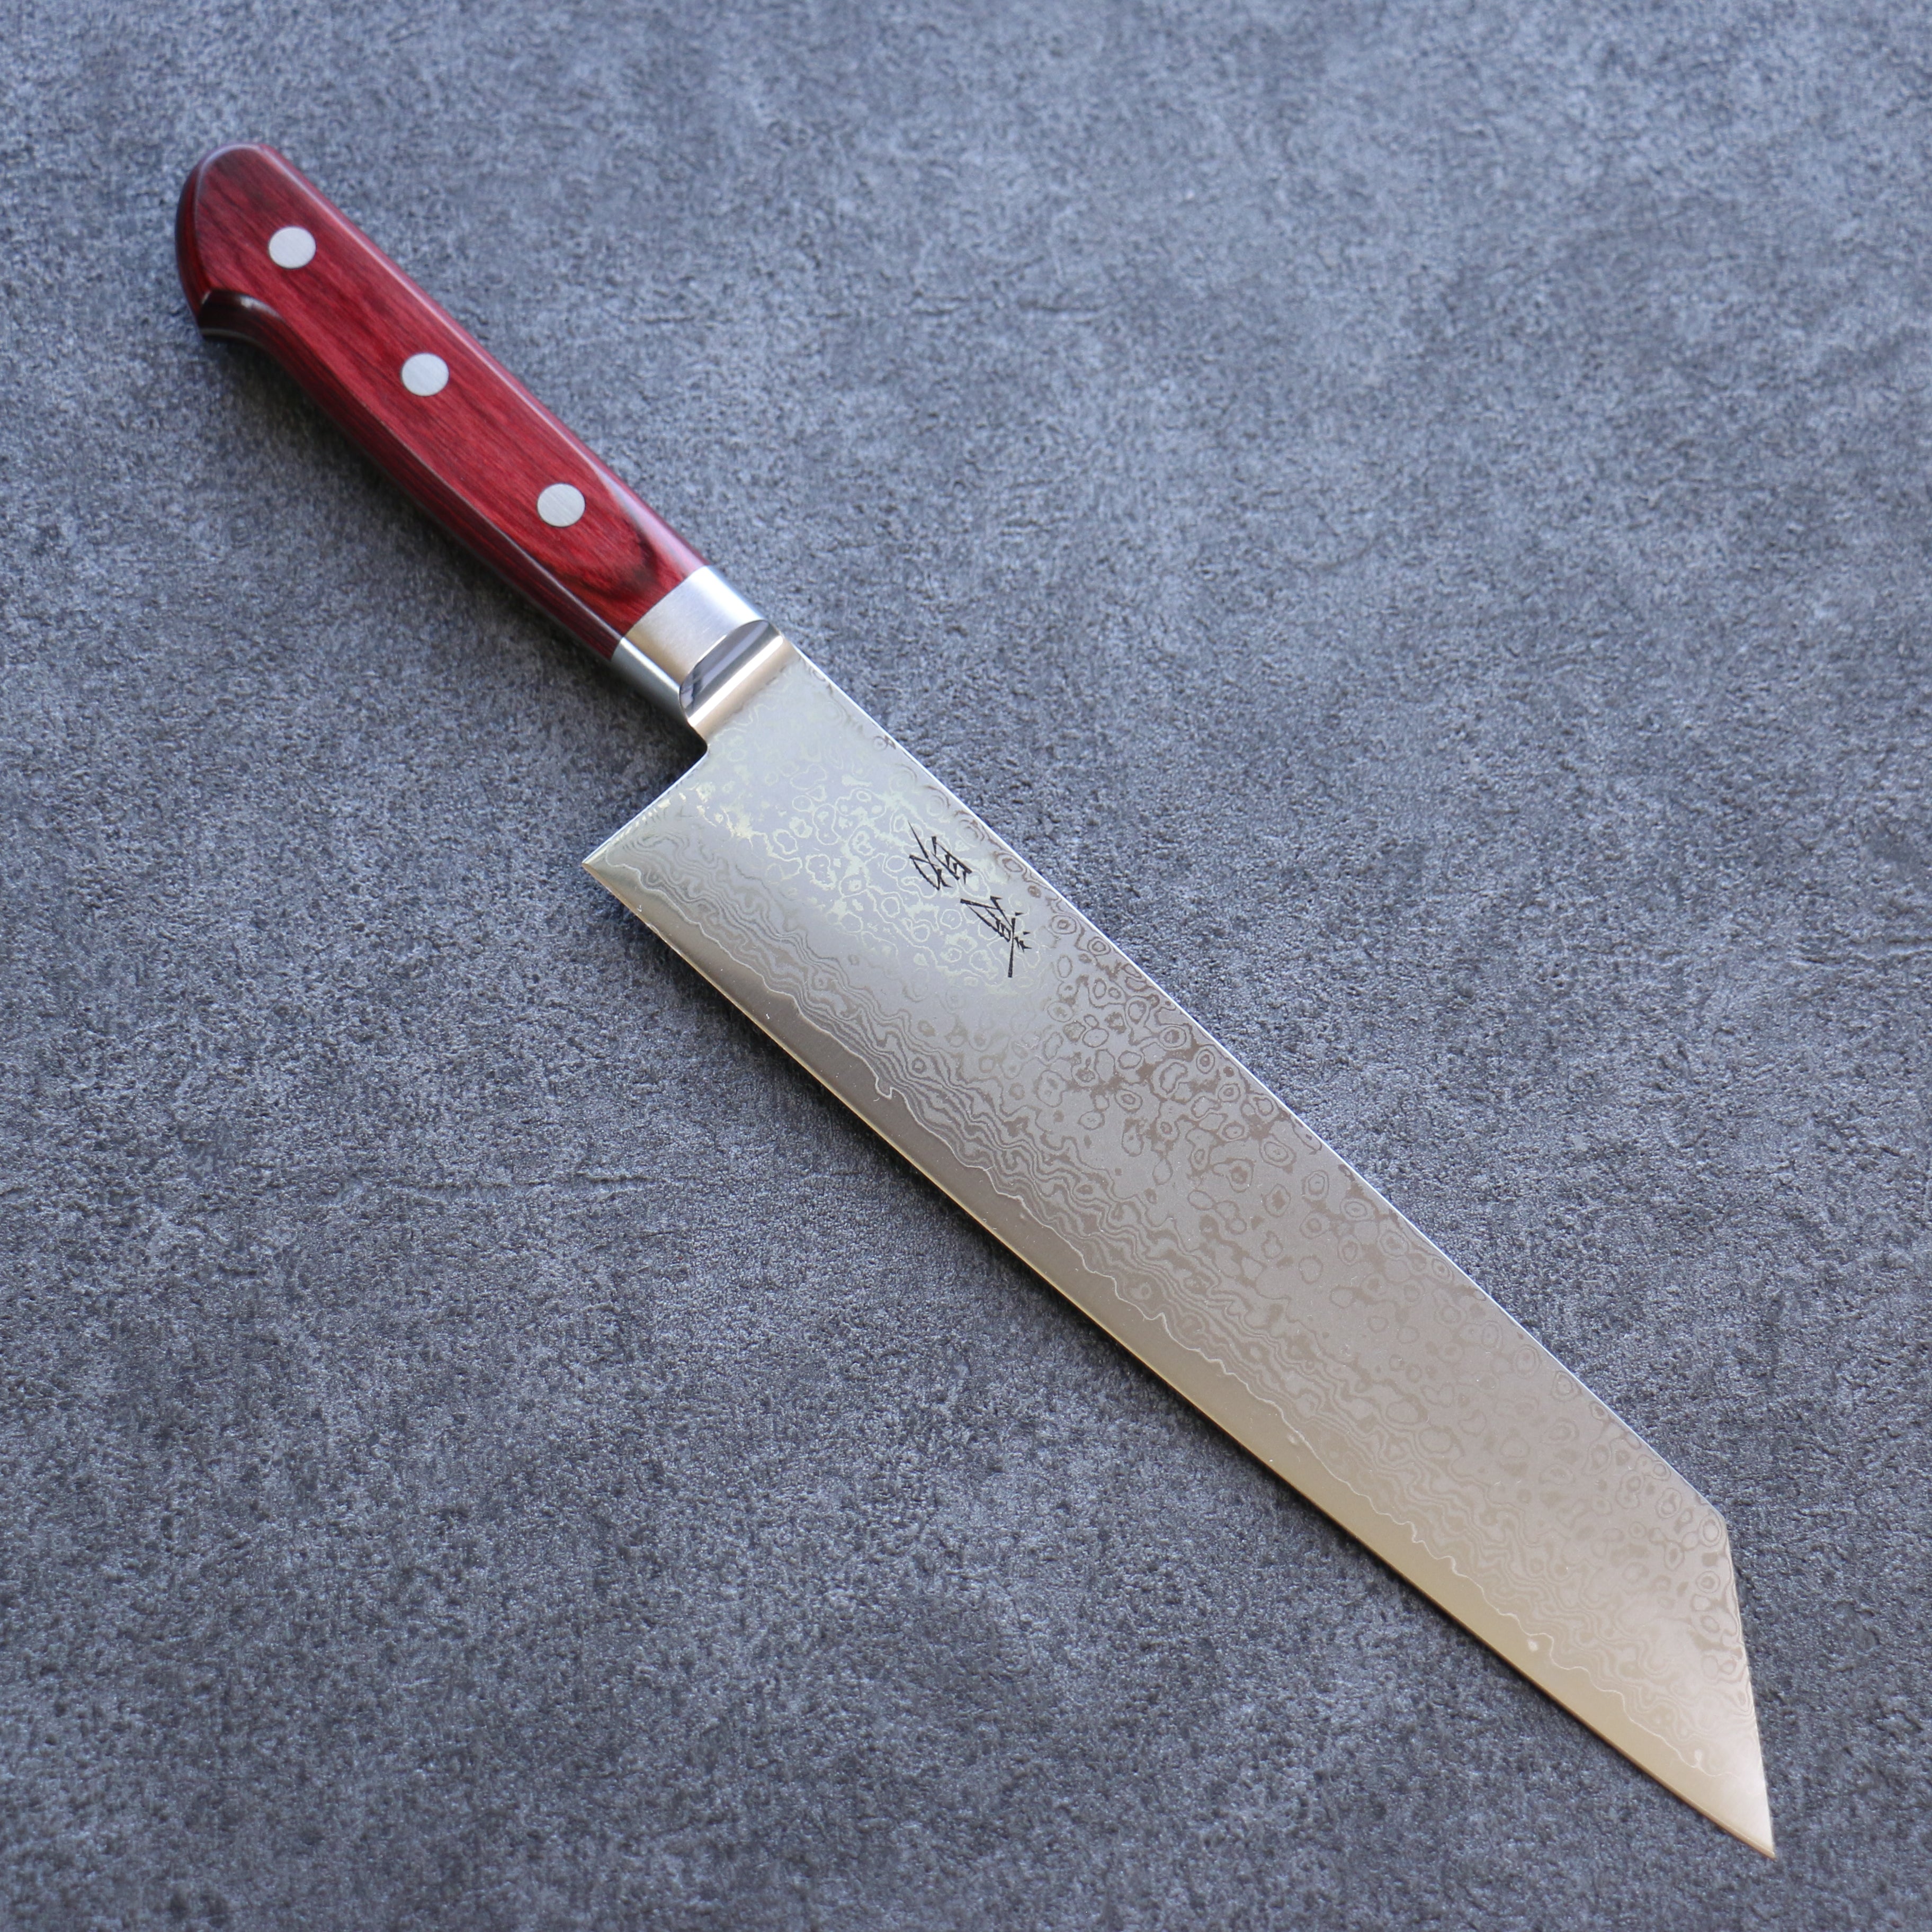 Curved Slicer (Butcher) Knife 10 Inch - Damascus Japanese VG10 Super Steel  67 Layer High Carbon Stainless Steel